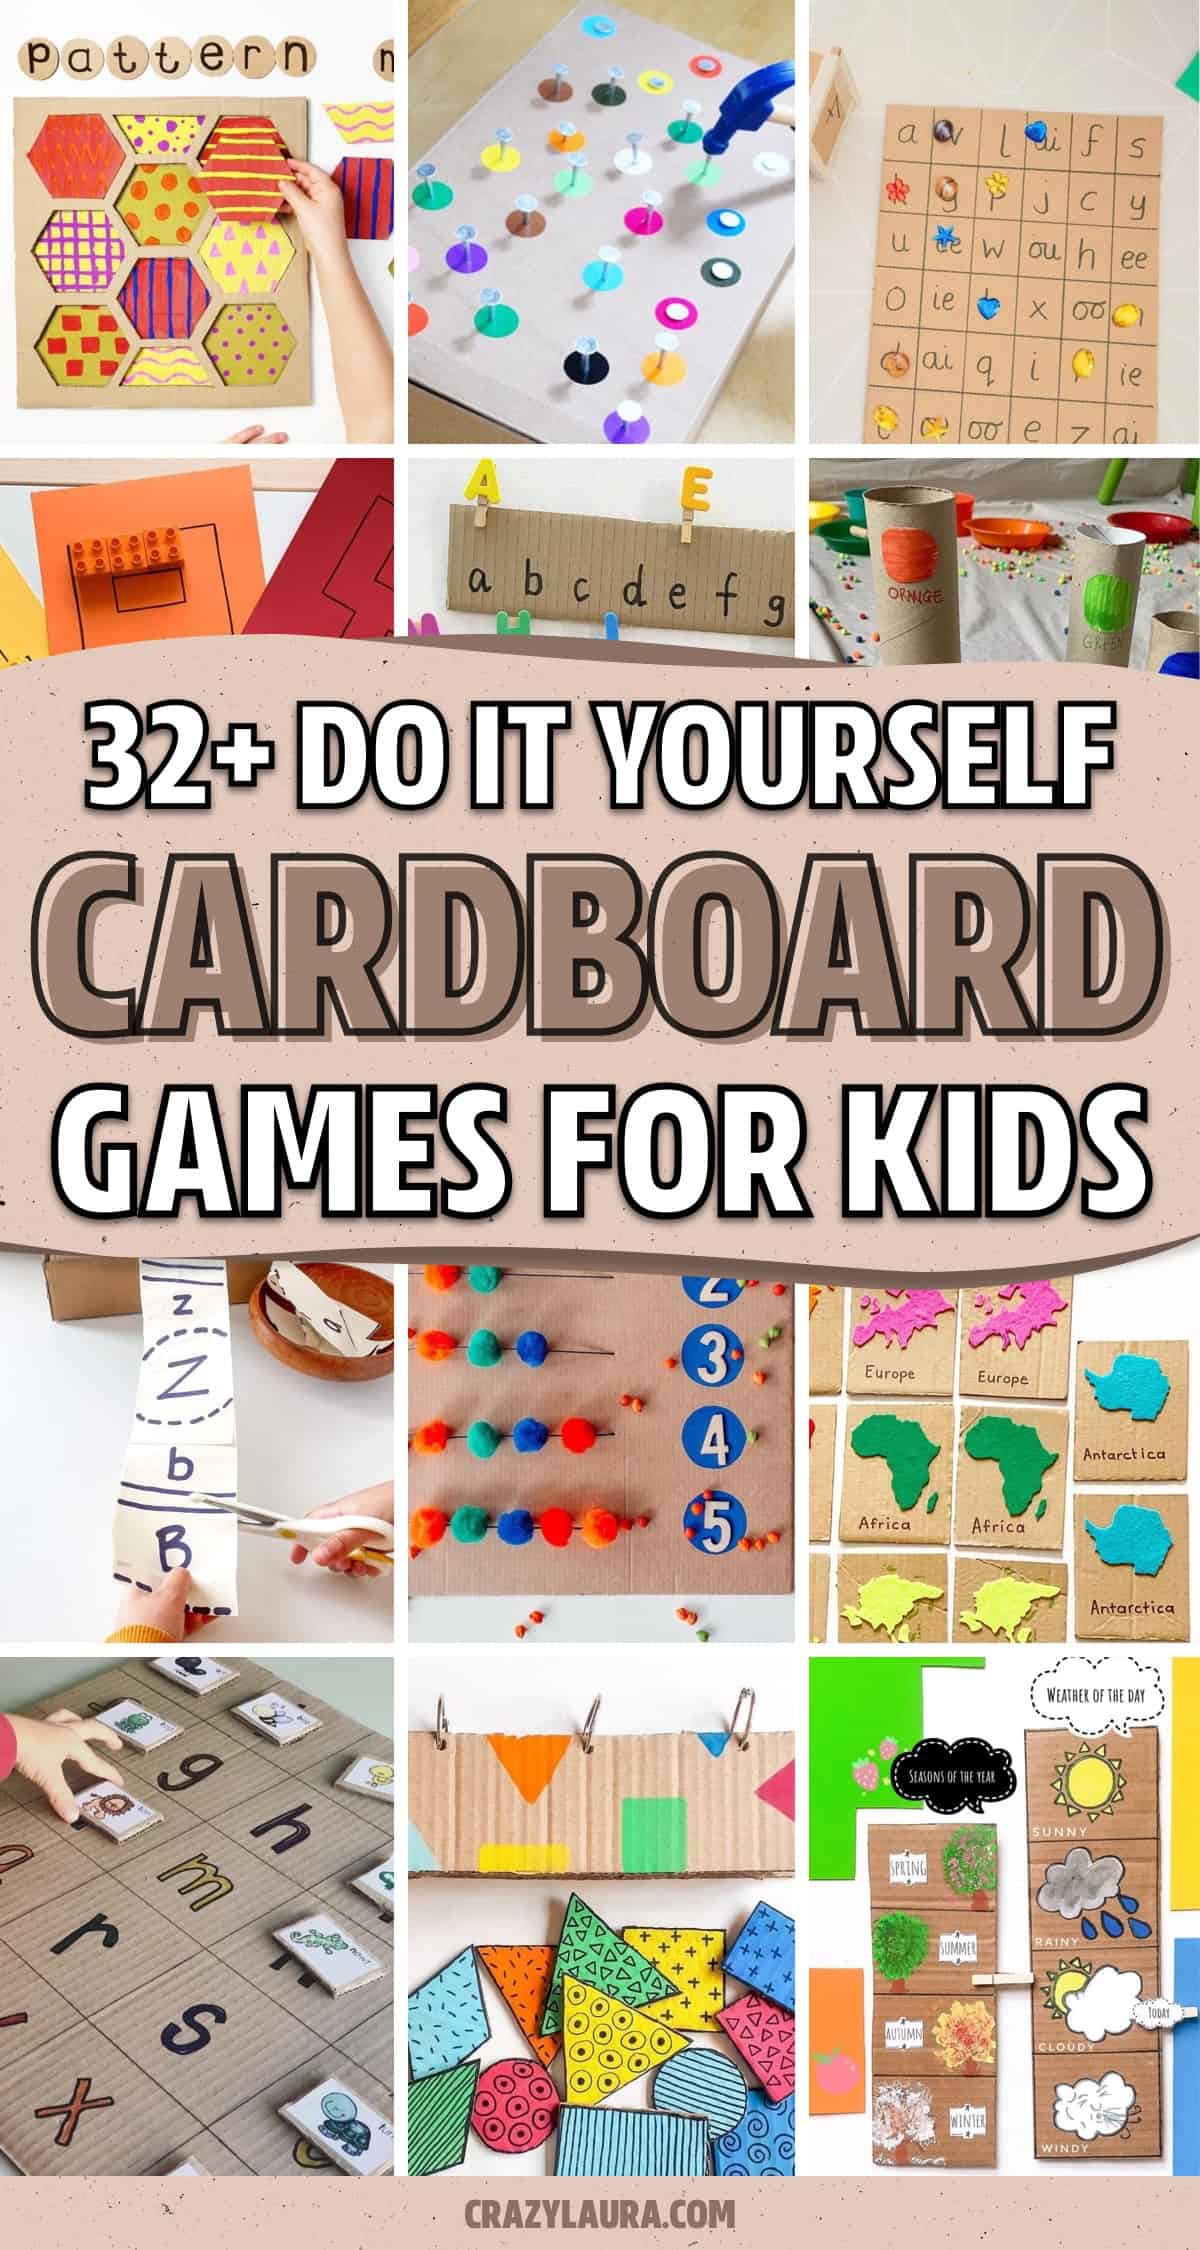 35+ Best DIY Games & Learning Activities For Kids In